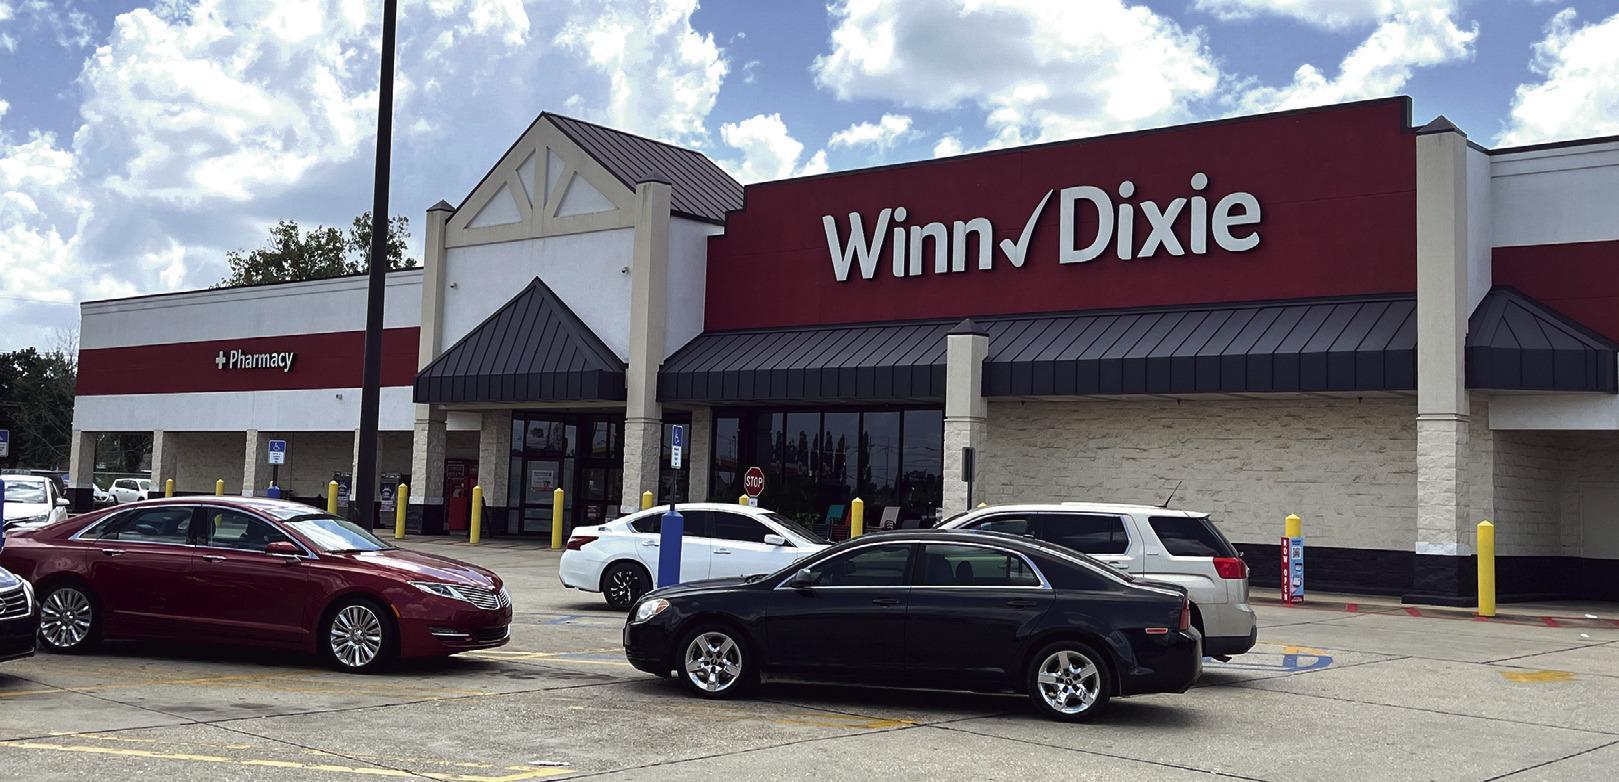 Last week it was announced that all the Winn-Dixie and Harveys Supermarkets will be sold to the grocery store chain ALDI. ALDI, who recently opened a store in LaPlace, has publicly stated that some stores will be converted to ALDI and some will remain Win